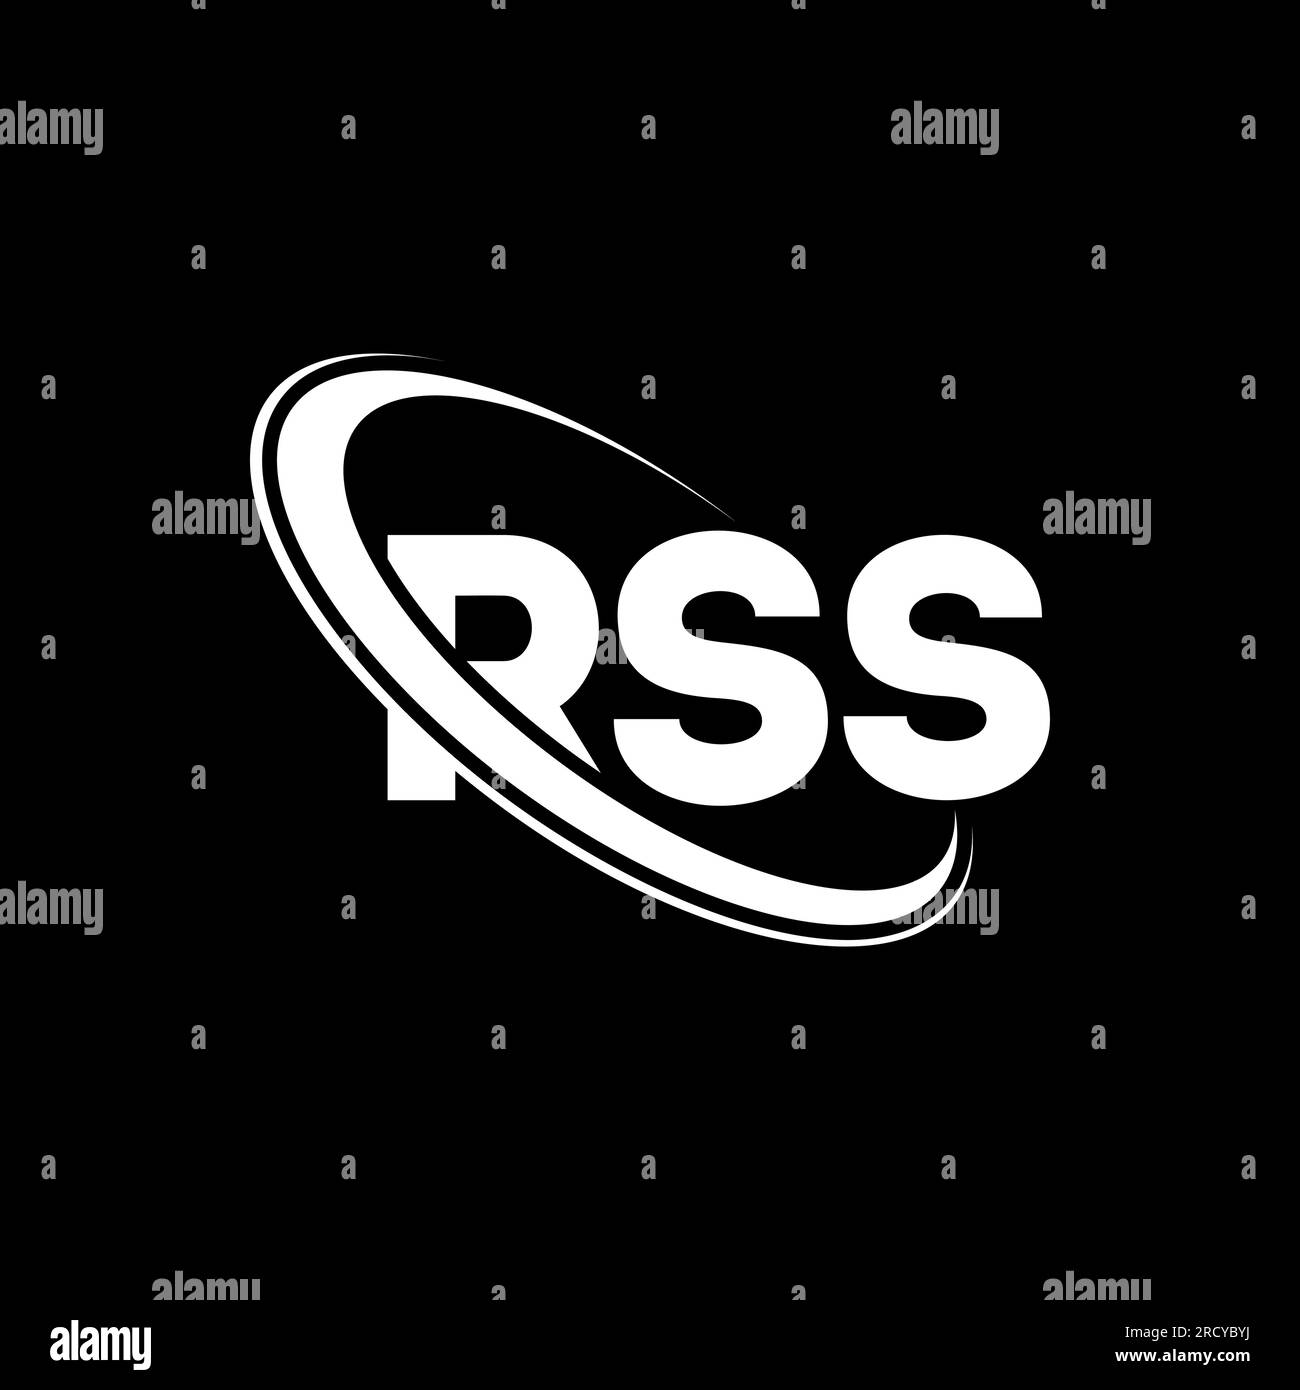 RSS logo. RSS letter. RSS letter logo design. Initials RSS logo linked with circle and uppercase monogram logo. RSS typography for technology, busines Stock Vector